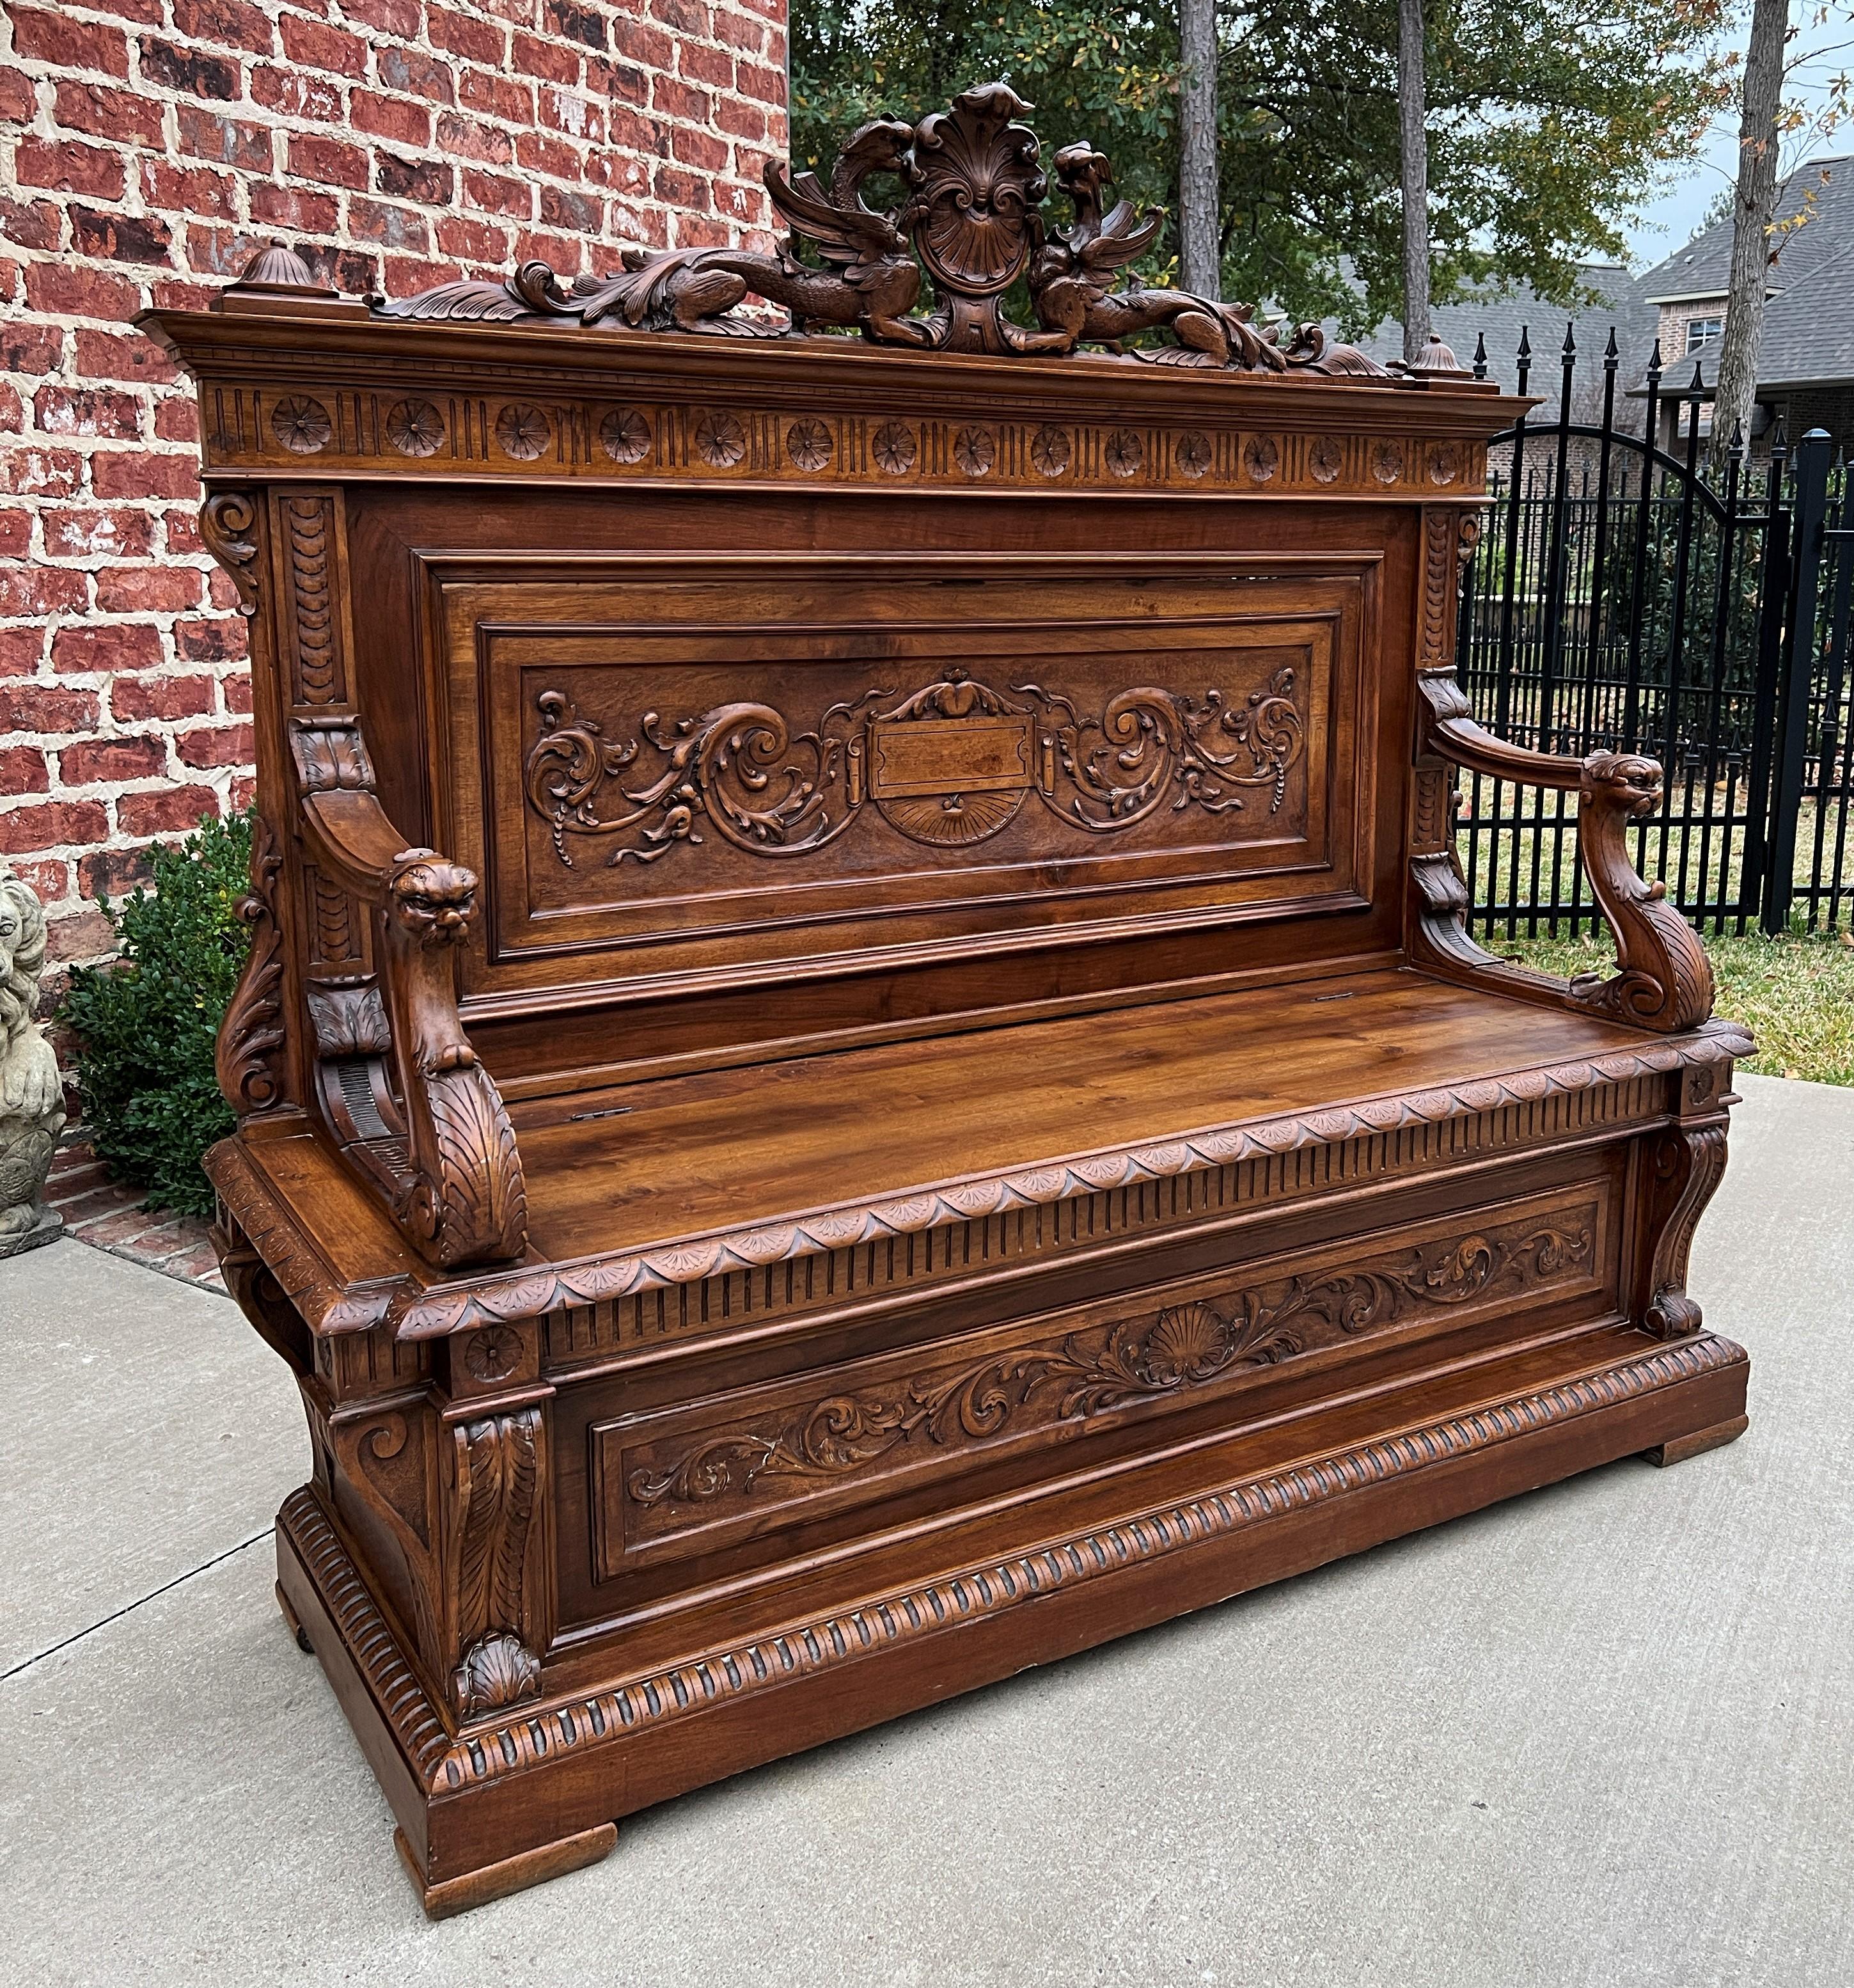 Beautiful carved walnut antique Italian Renaissance revival bench or settee with lift top seat~~c. 1880s.

 HIGHLY CARVED~~these benches are always in high demand.

Versatile piece with so many functions~~use as a traditional entry or hall